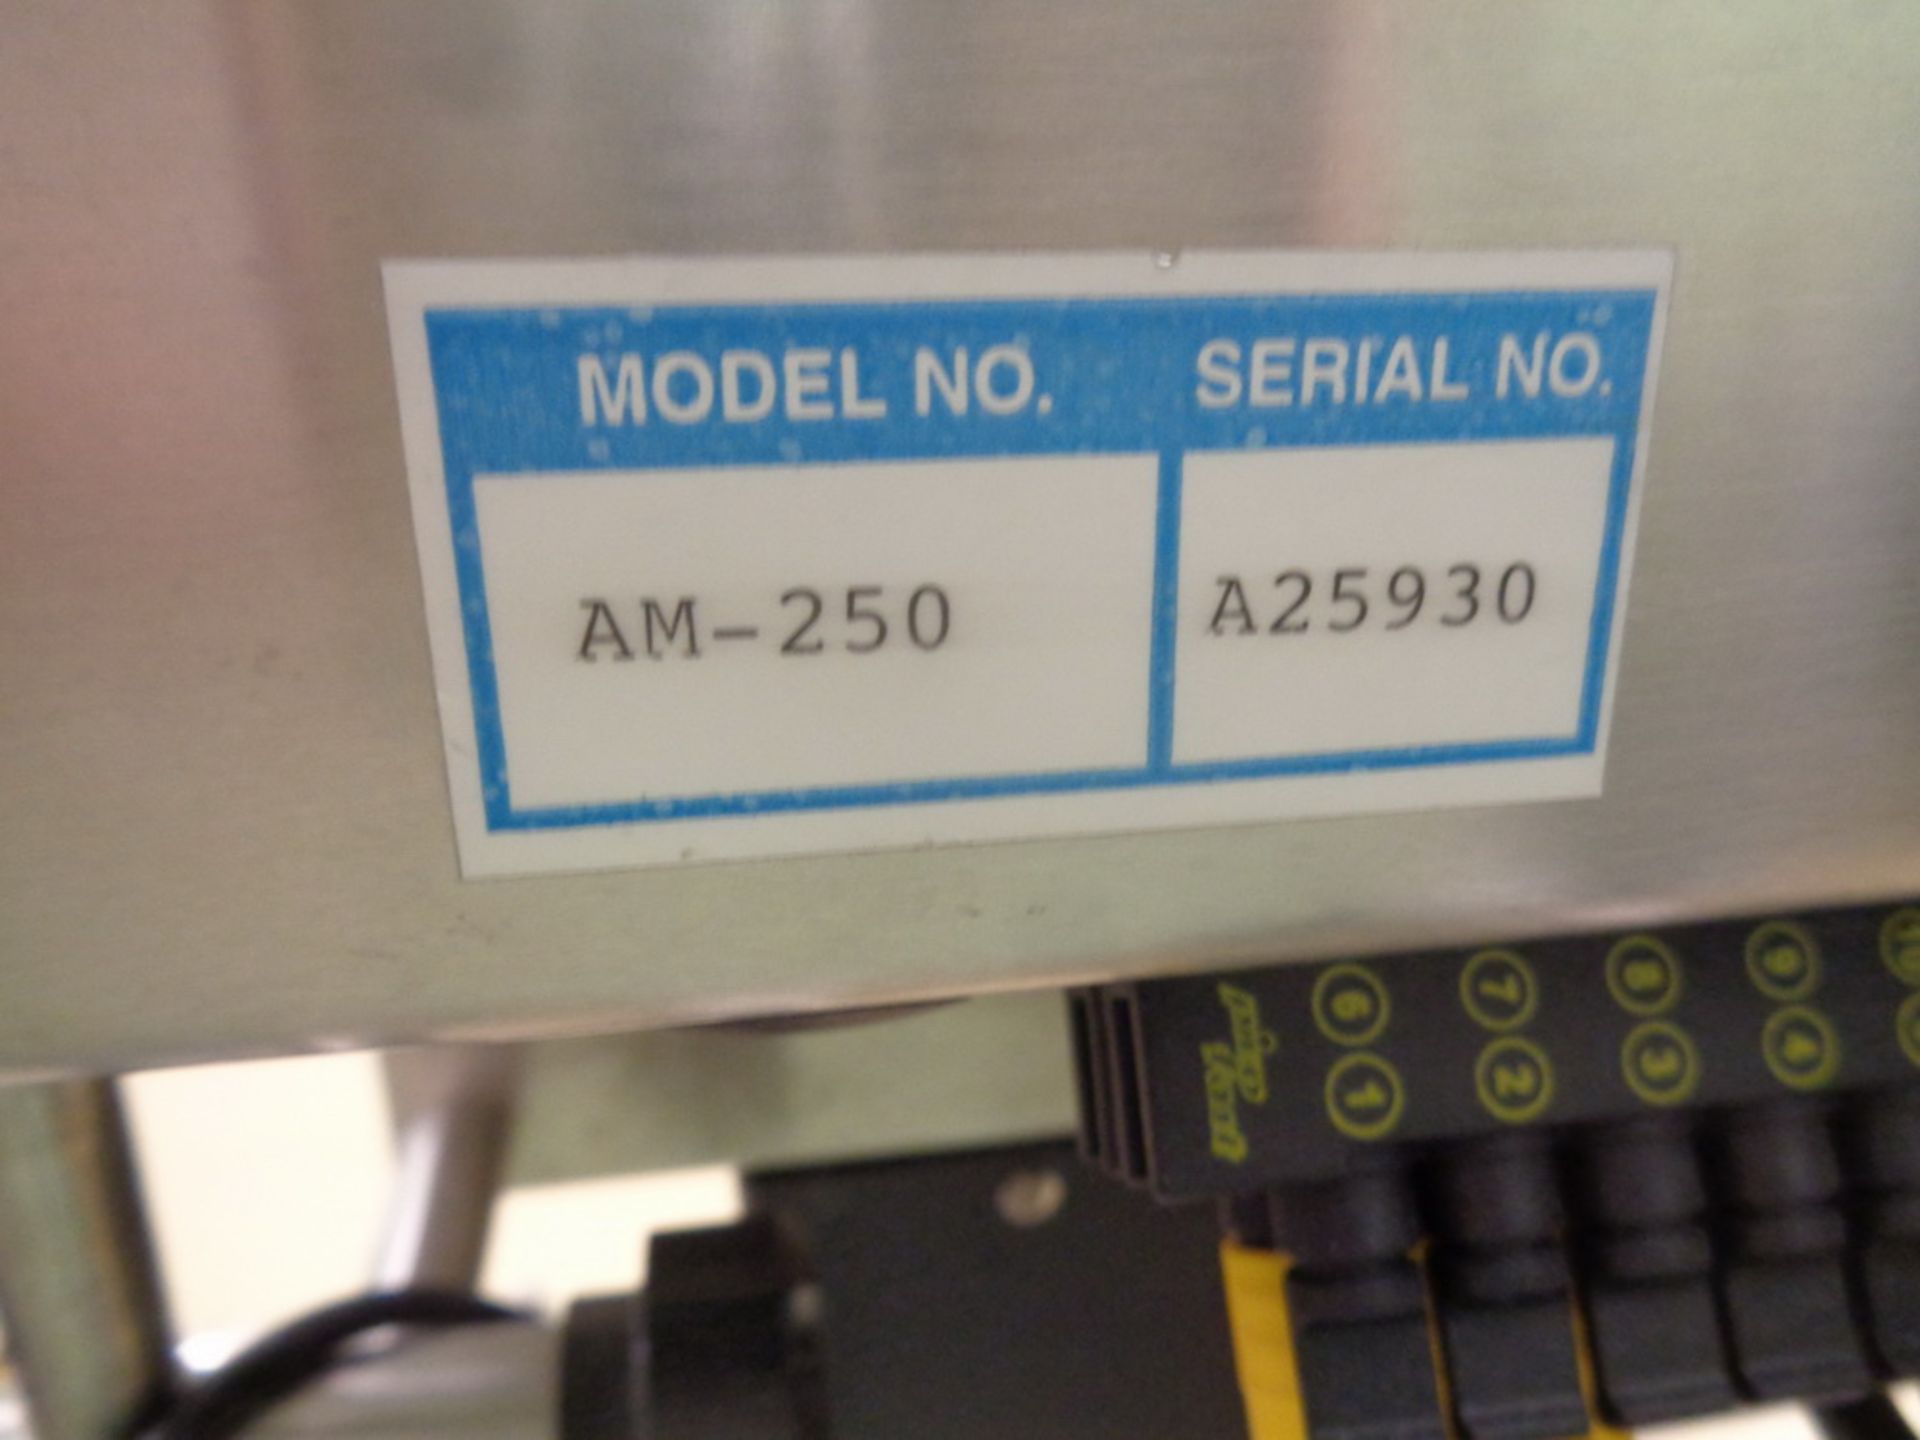 Automate Induction Sealer, Model AM250, S/N A25930, stainless steel construction, portable - Image 6 of 6